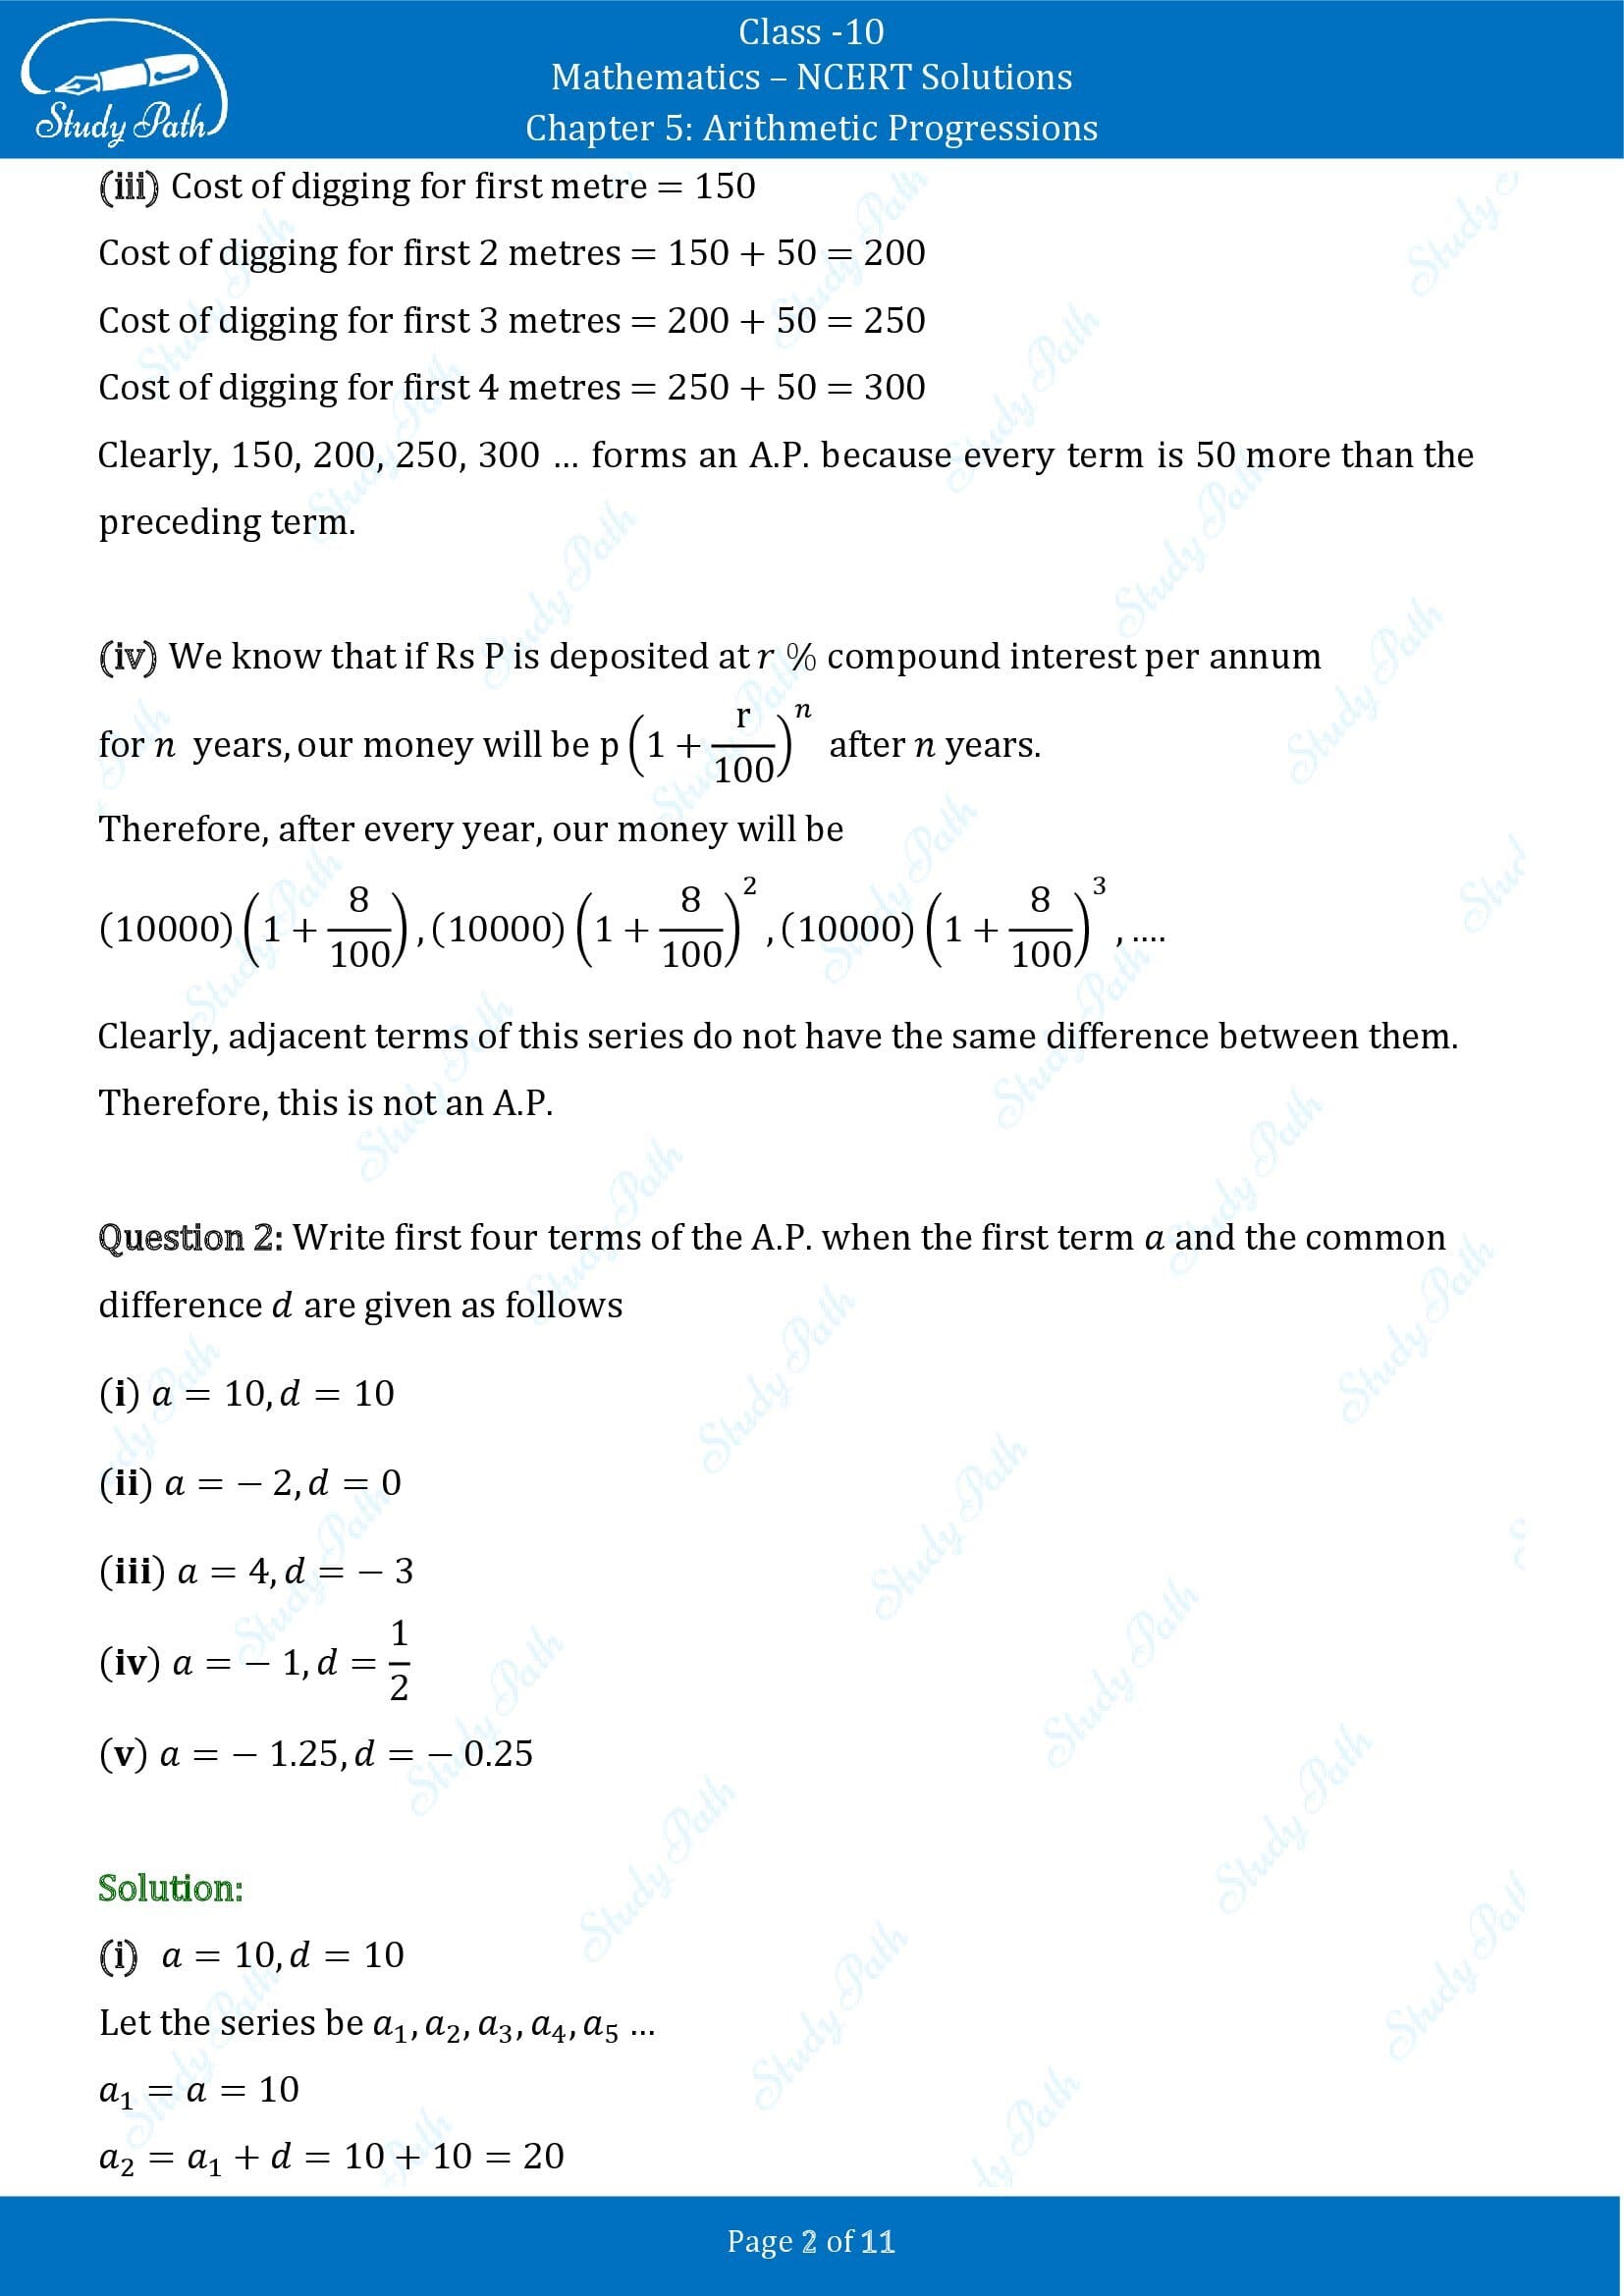 NCERT Solutions for Class 10 Maths Chapter 5 Arithmetic Progressions Exercise 5.1 00002